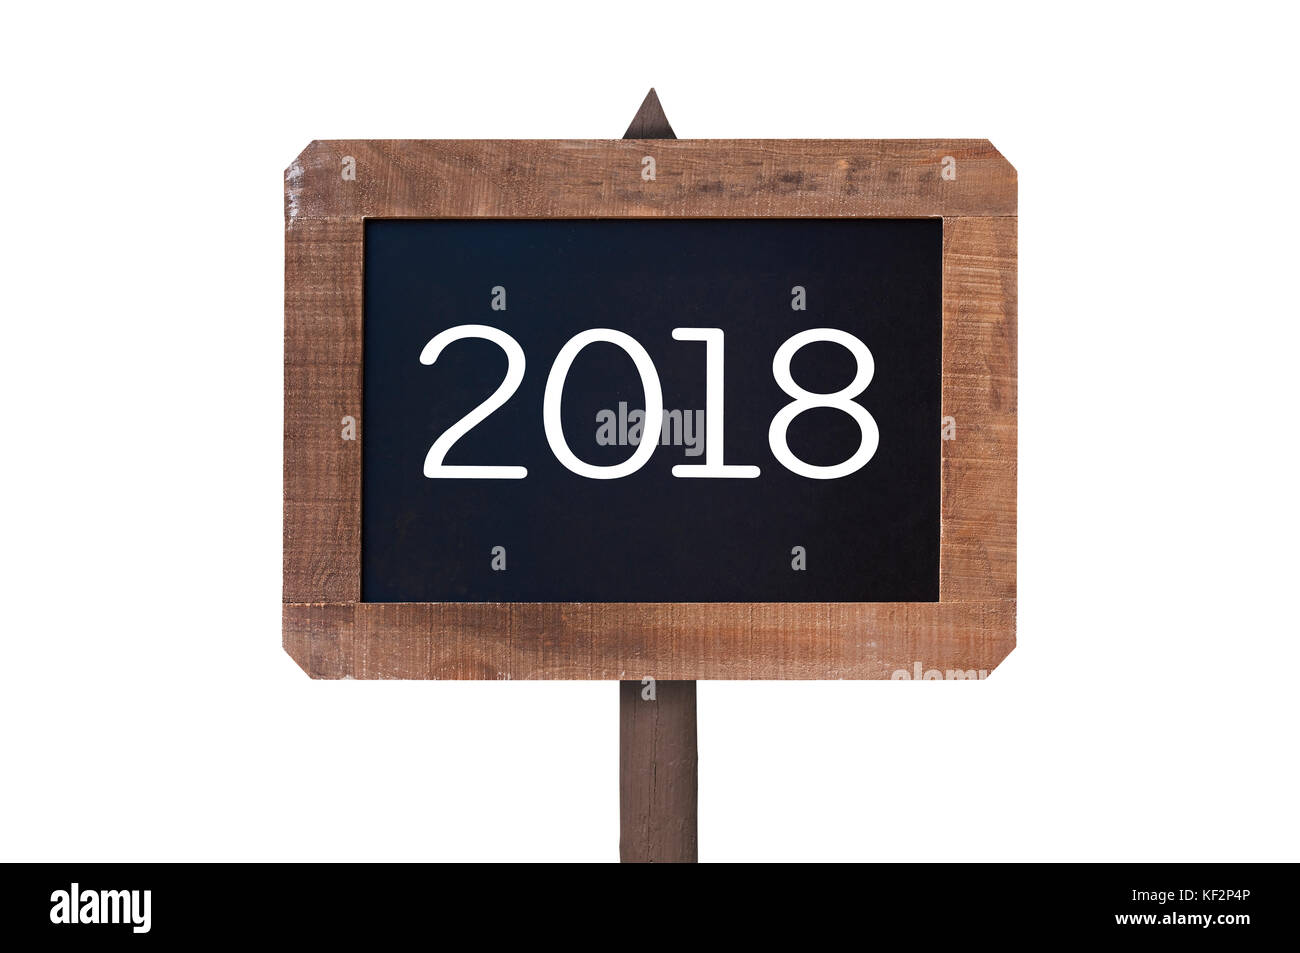 2018 written on a vintage wooden post sign isolated on white background Stock Photo